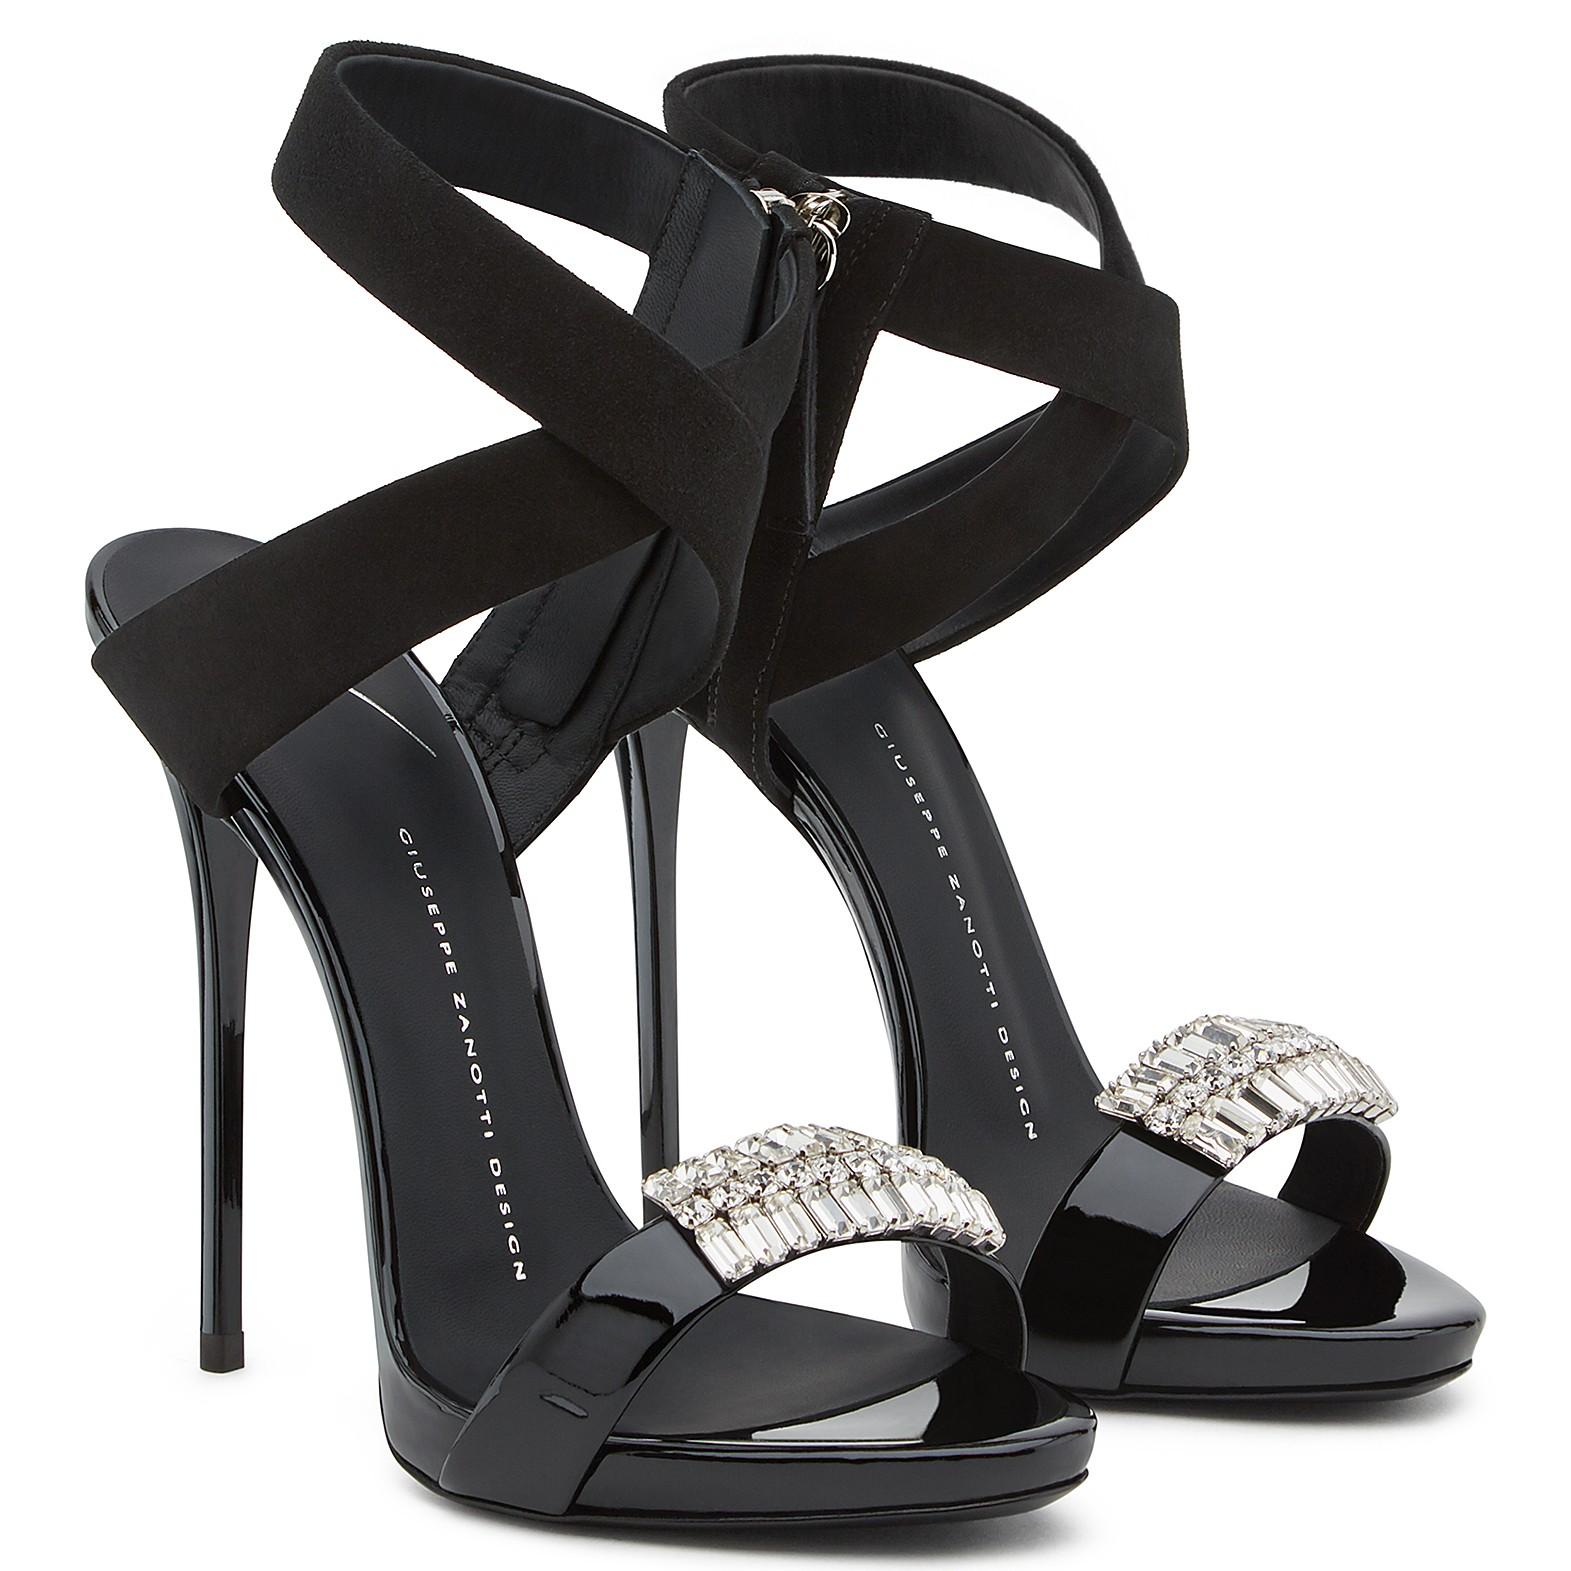 Giuseppe Zanotti NEW Black Suede Patent Crystal Evening Sandals Heels in Box 1